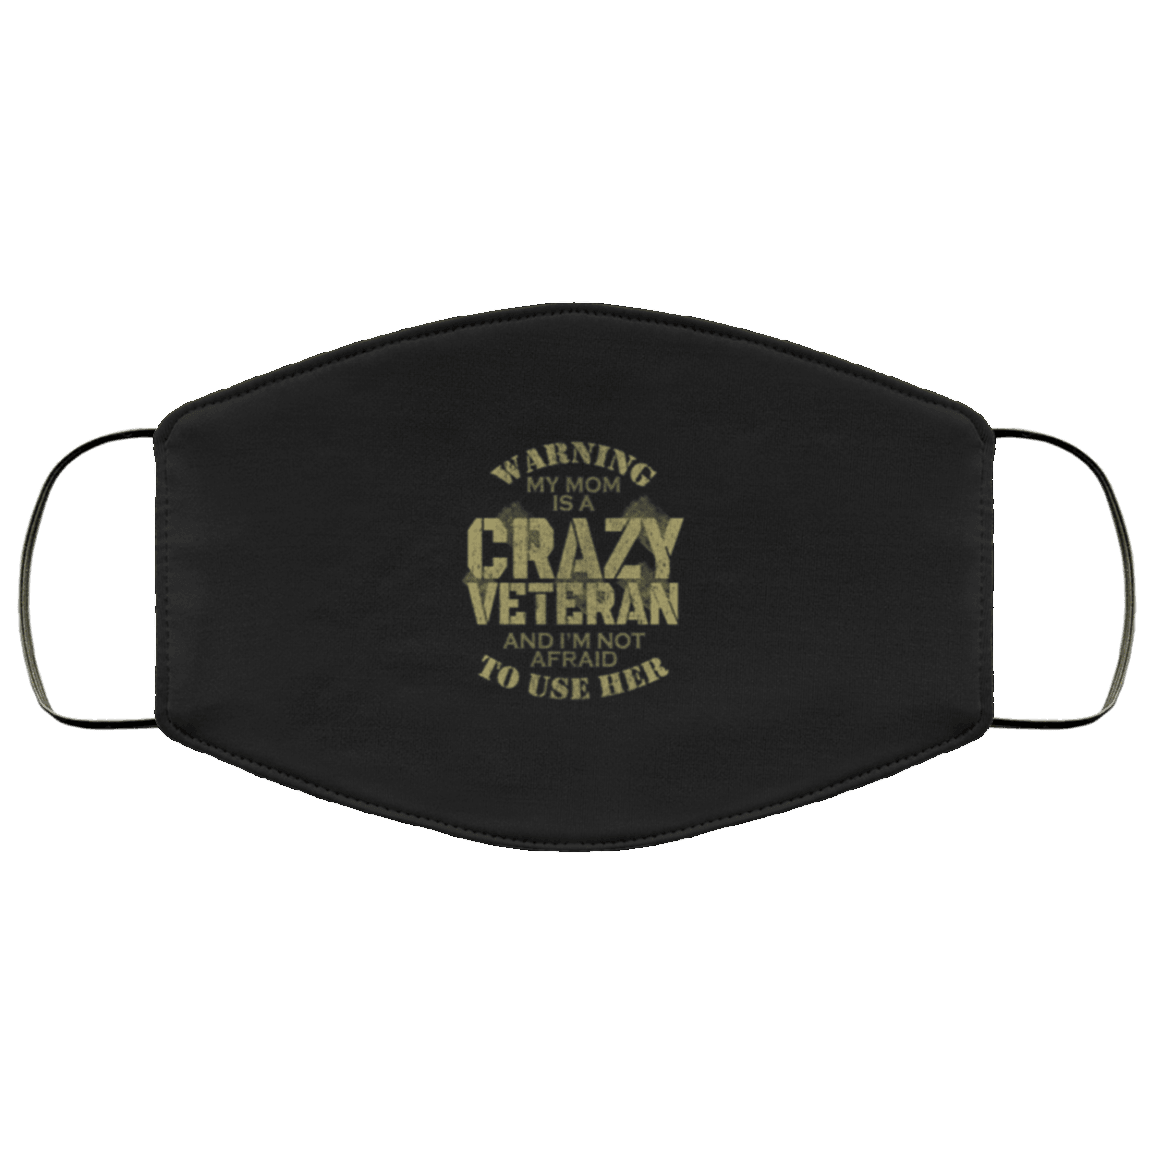 Designs by MyUtopia Shout Out:Warning: Mom Is A Crazy Veteran Adult Fabric Face Mask with Ear Loops,3 Layer Fabric Face Mask / Black / Adult,Fabric Face Mask